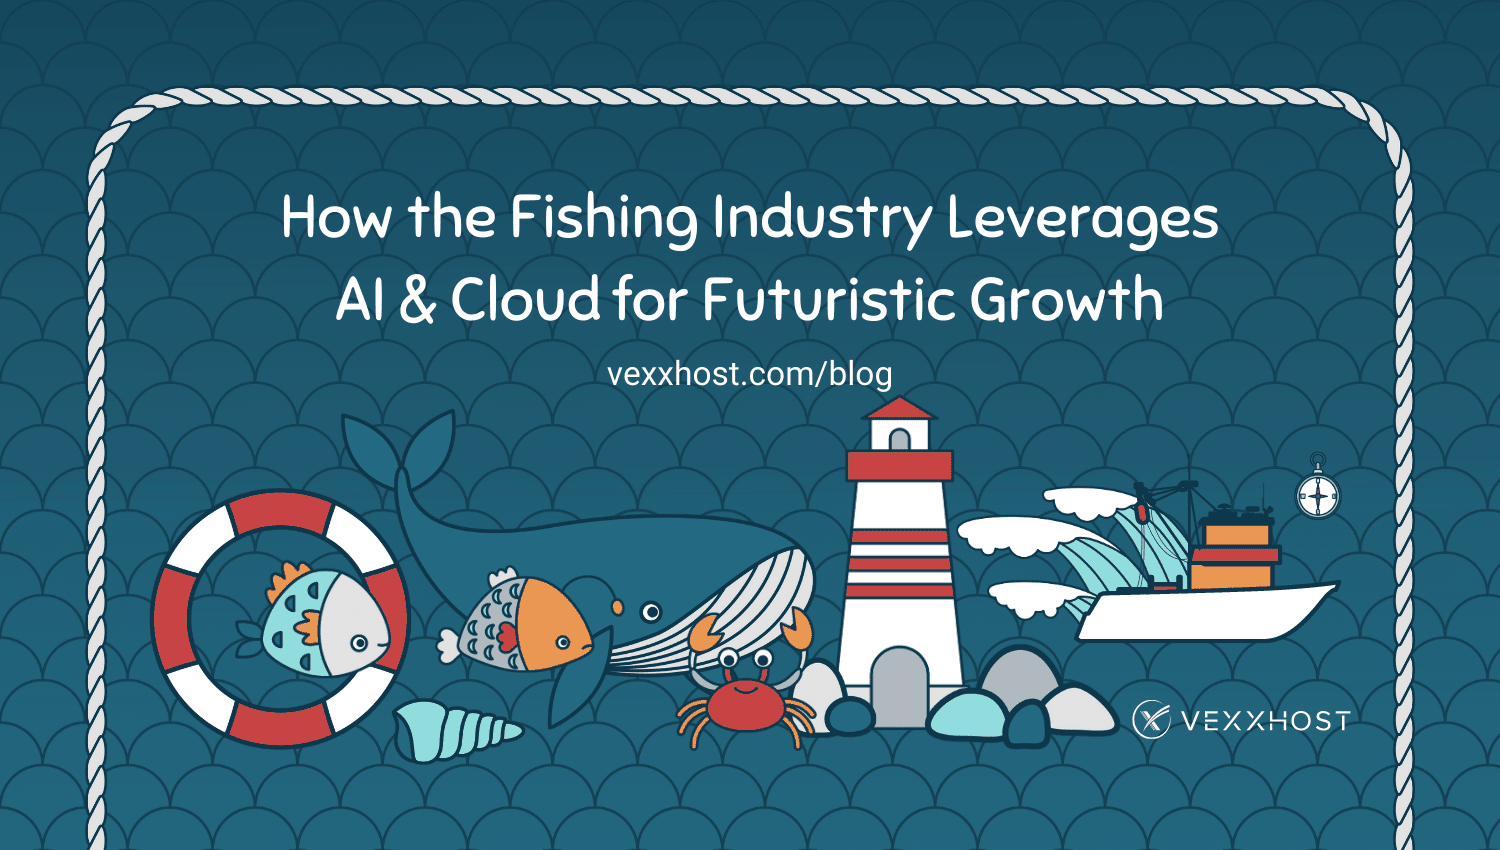 How the Fishing Industry Leverages AI and Cloud for Futuristic Growth